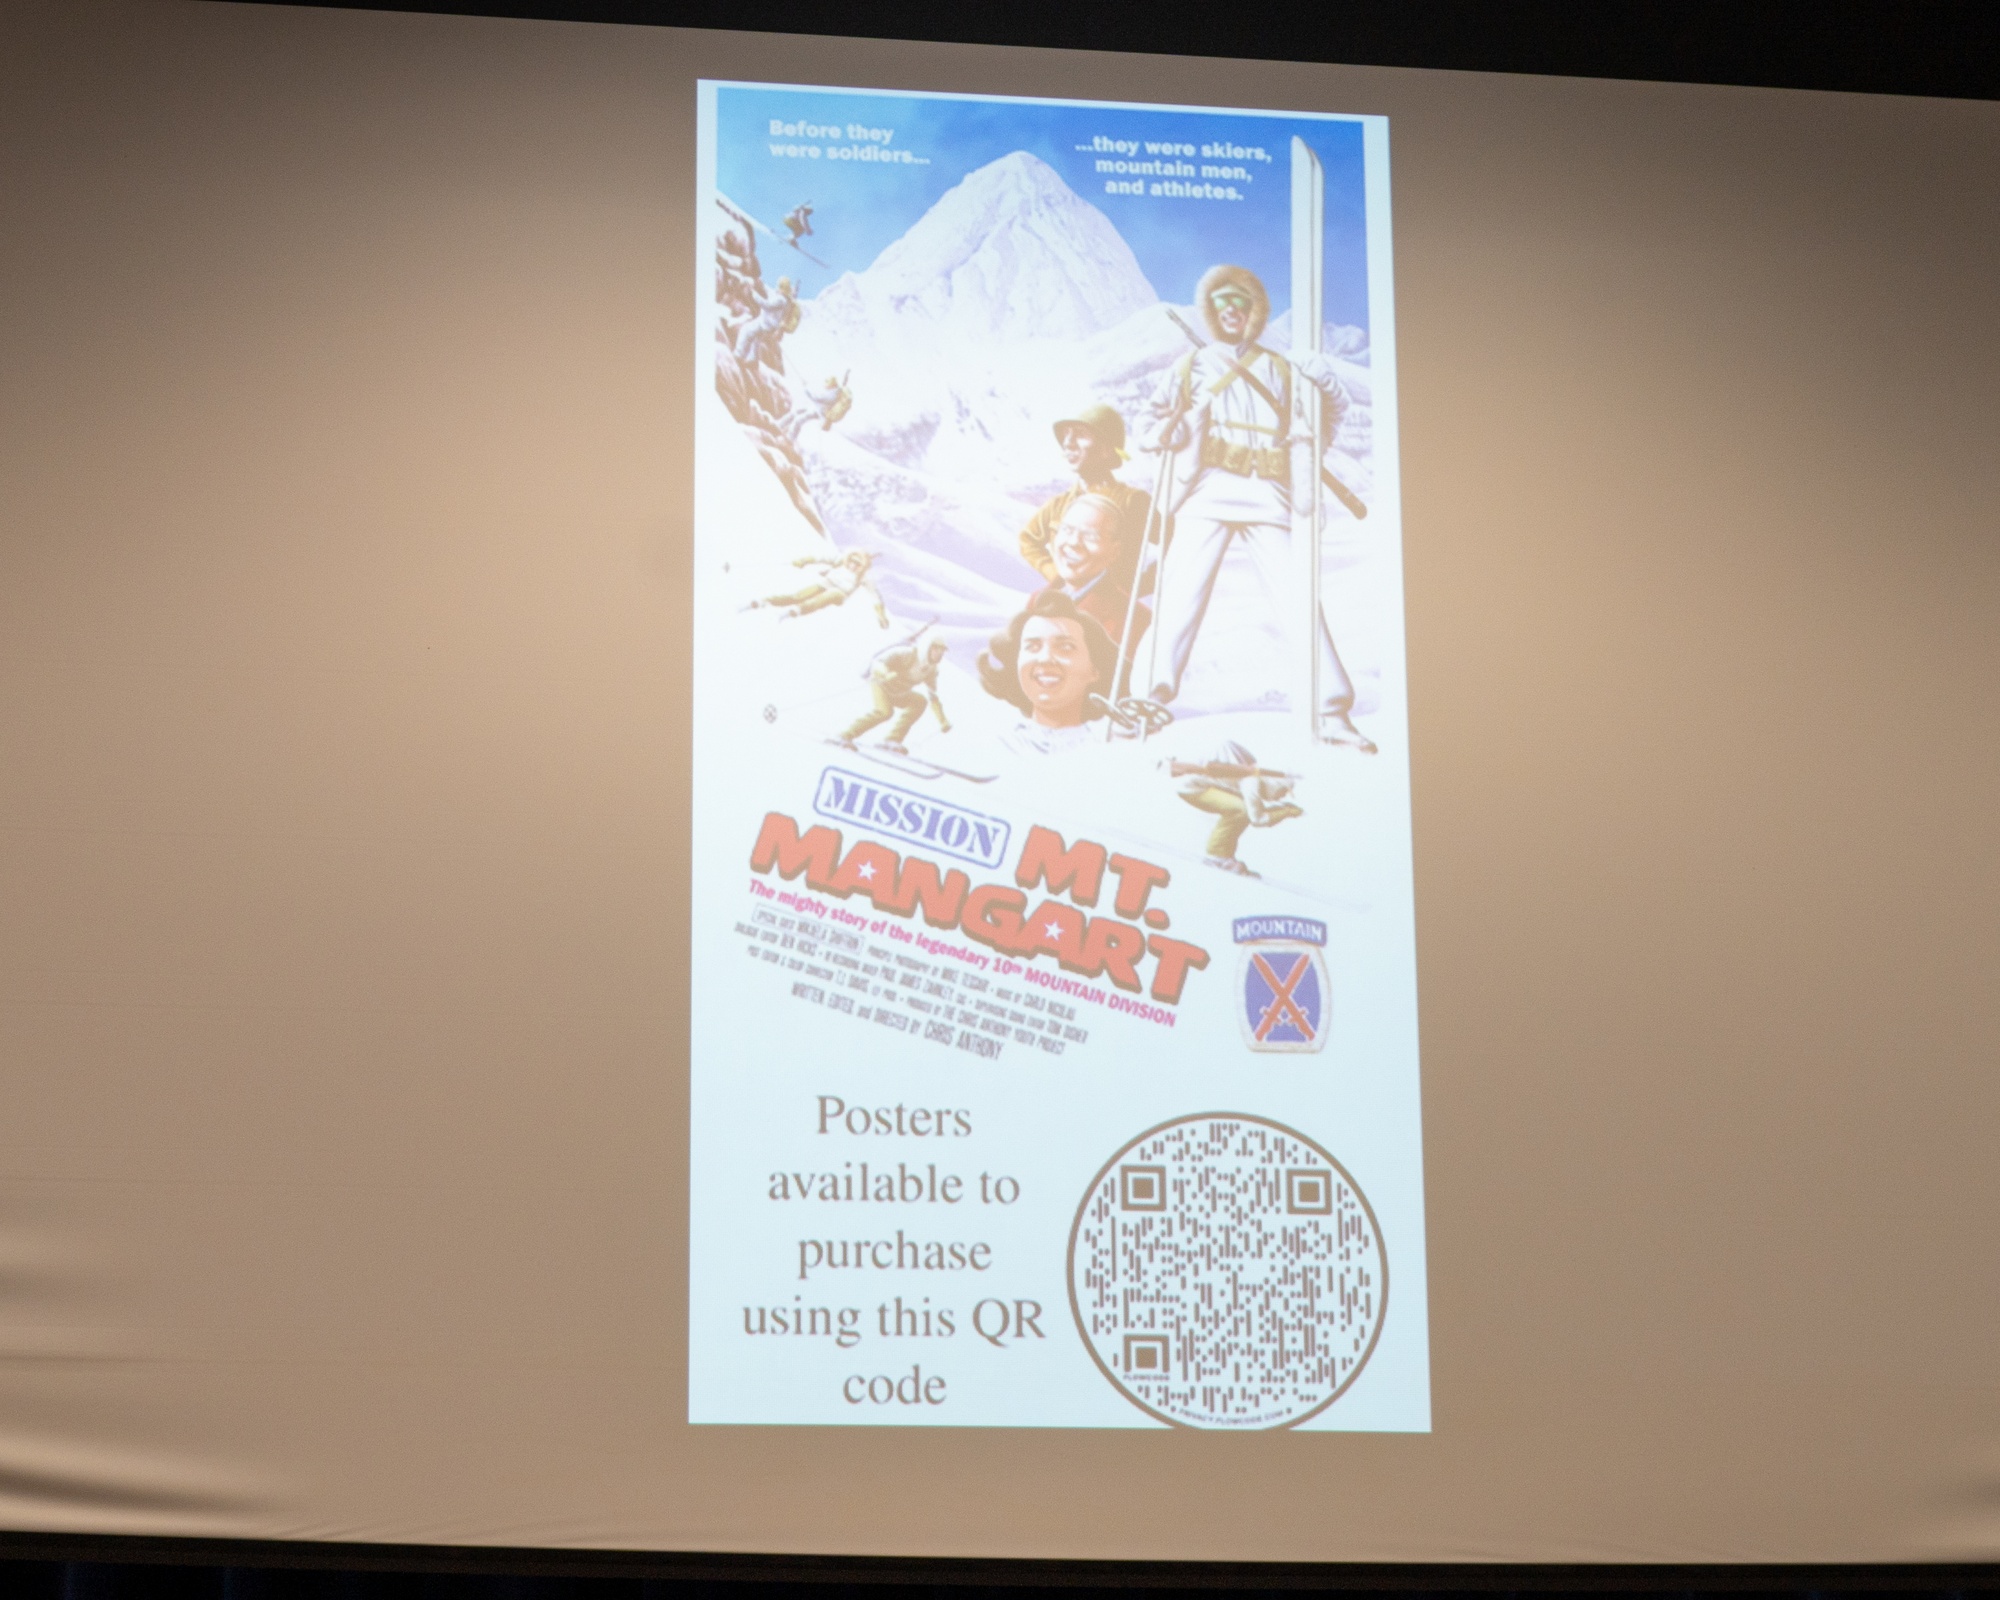 Mission Mt. Mangart' creators unveil classic film poster featuring 10th  Mountain Division